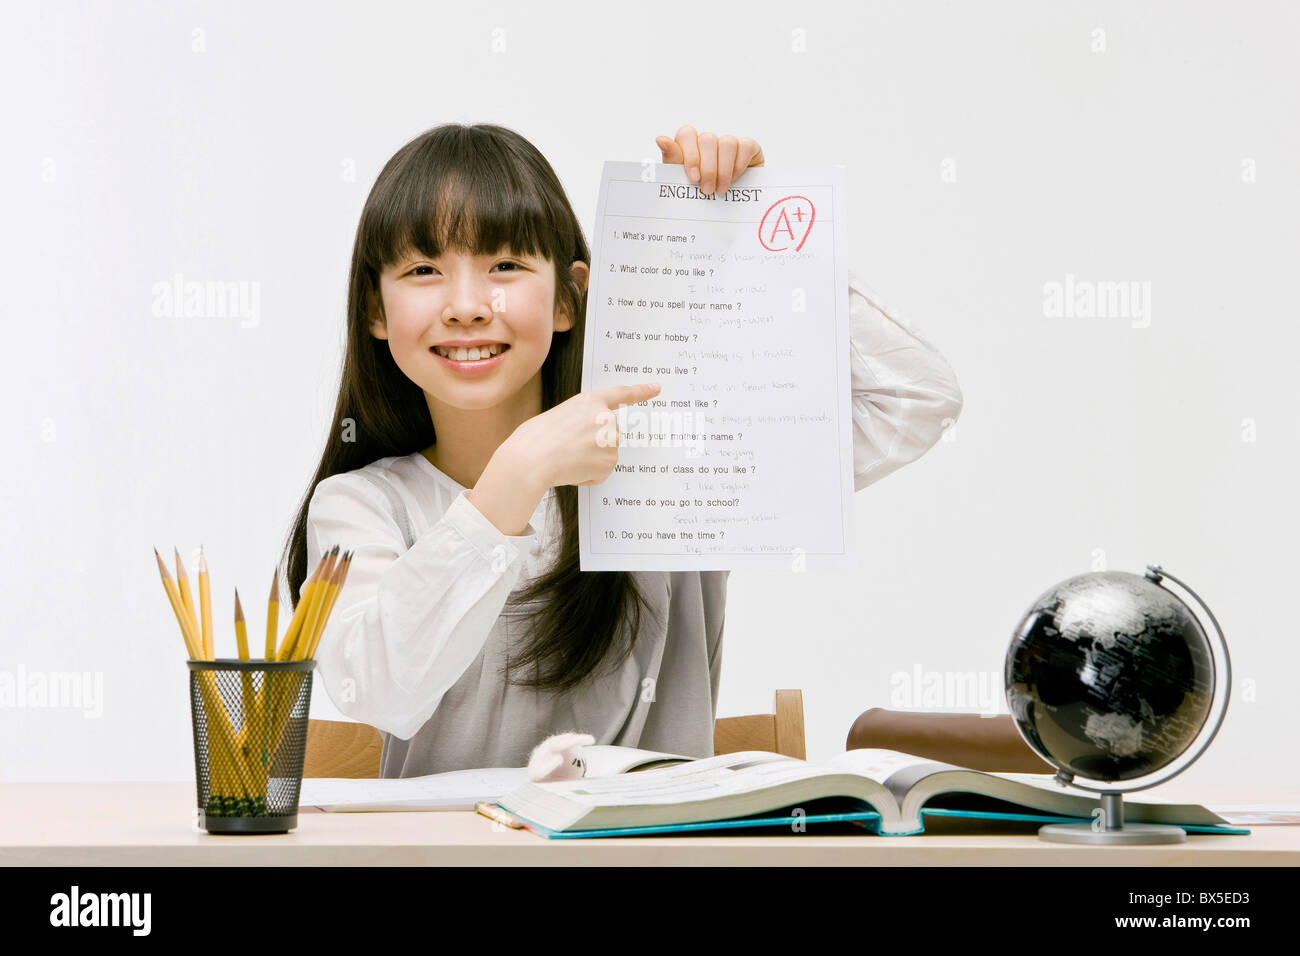 Girl holding English test with perfect score, close-up Stock Photo